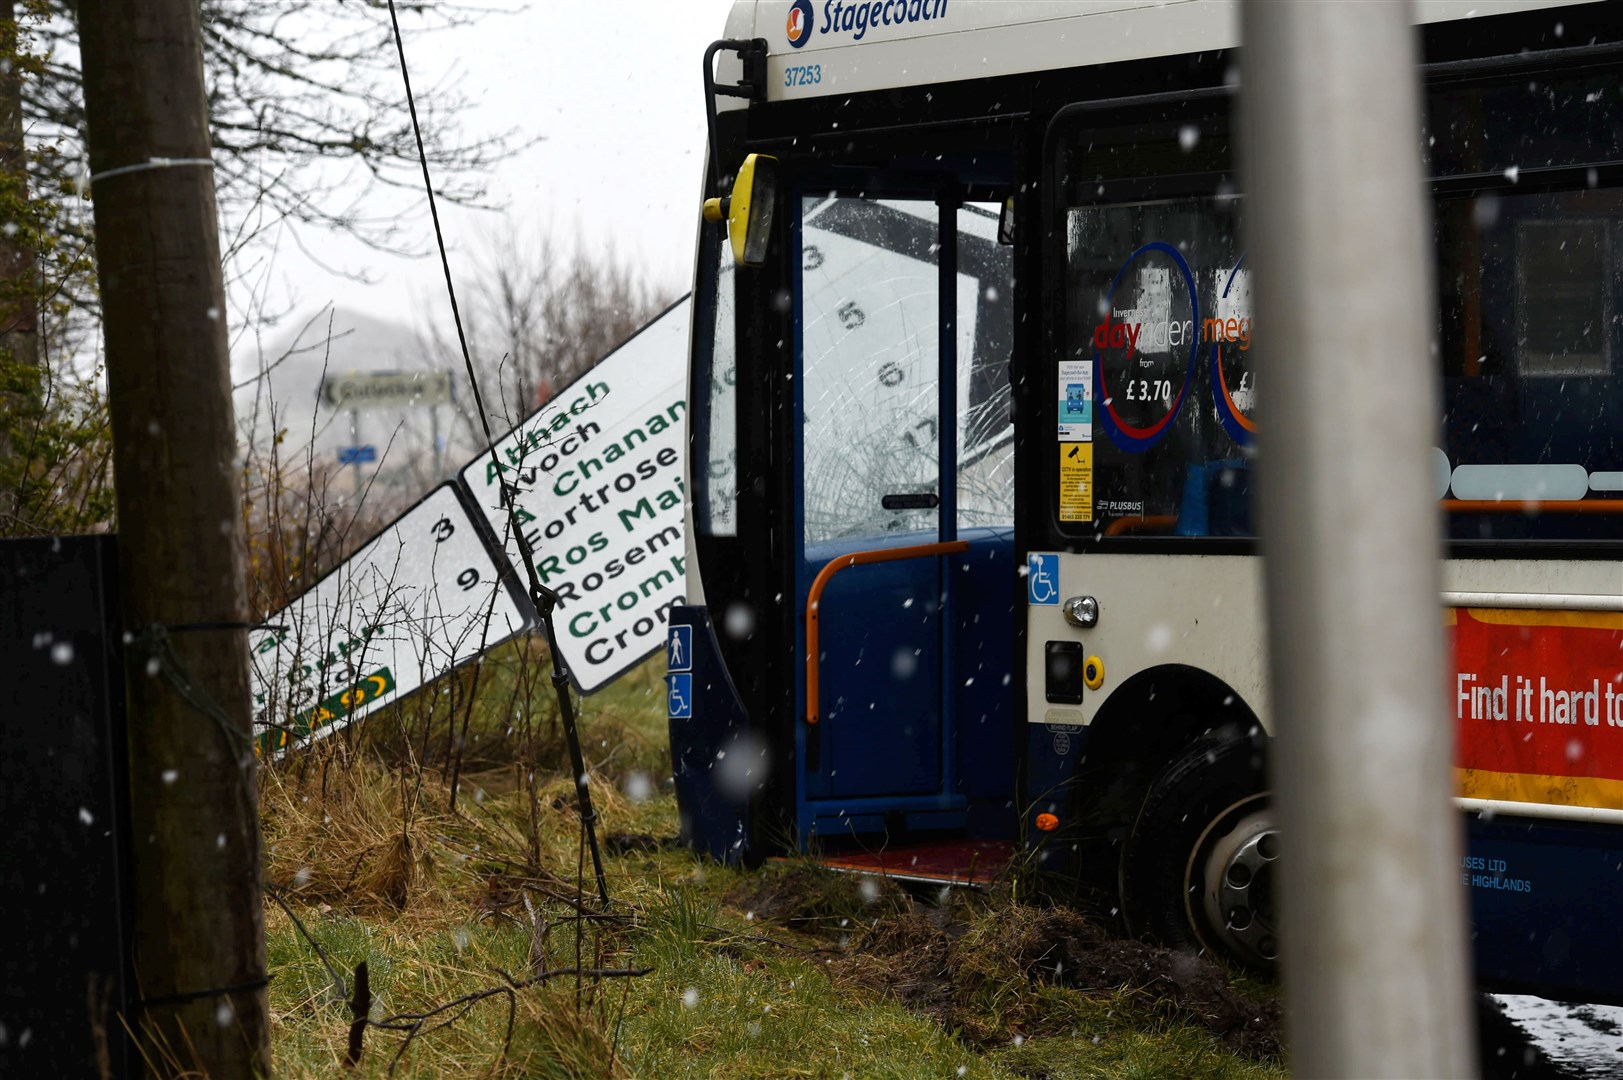 RTA - Bus and Asda delivery van collided at the junction on B9161 and the A832.